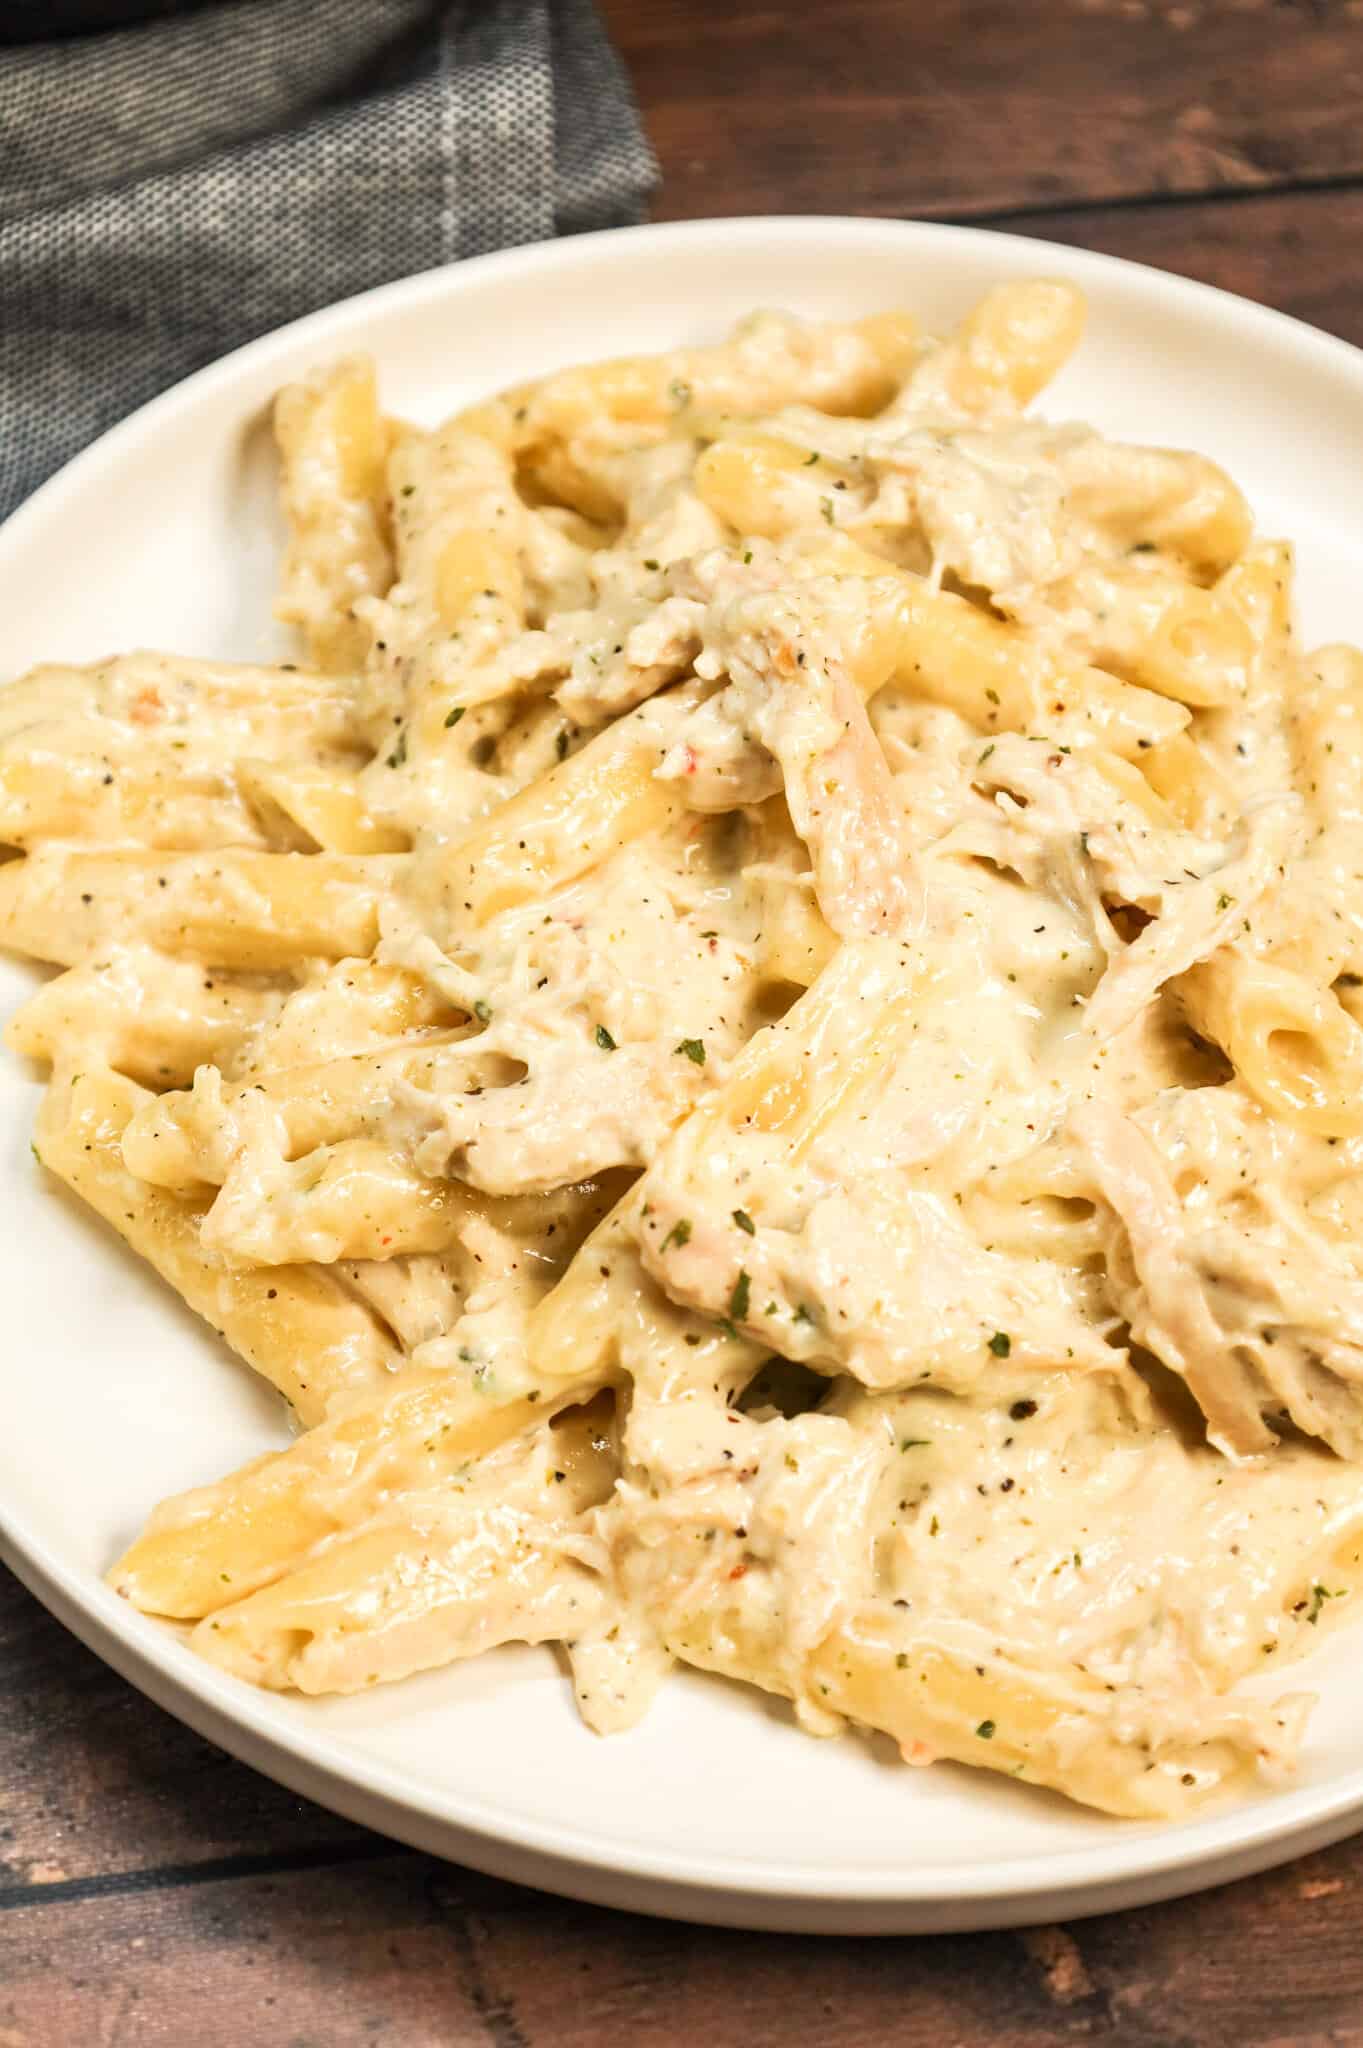 Chicken Alfredo Penne is an easy stove top pasta recipe loaded with shredded rotisserie chicken all tossed in a creamy garlic parmesan sauce.